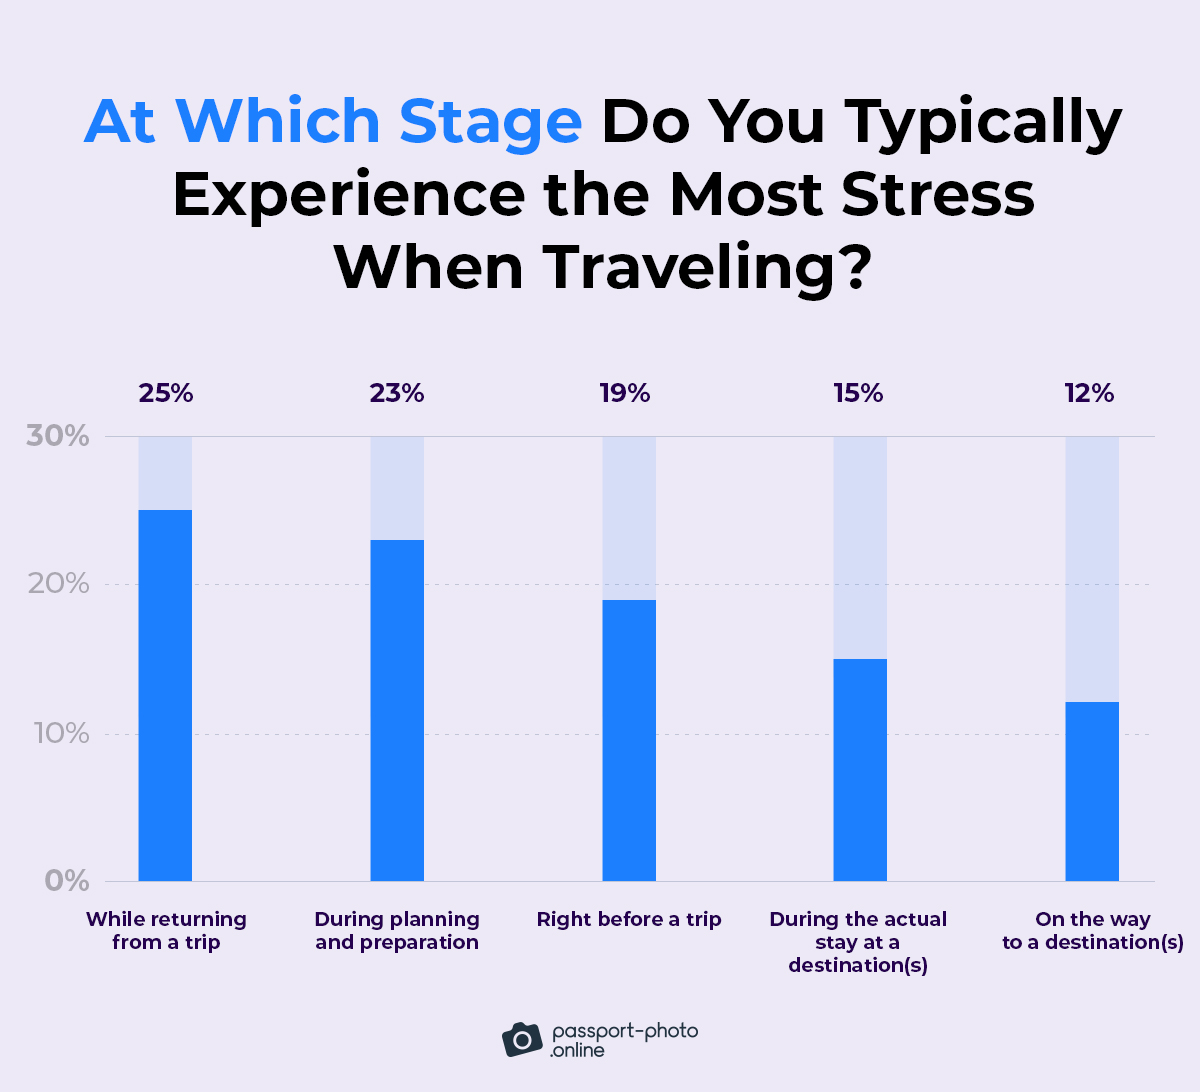 people usually experience the most stress while returning from a trip (25%)